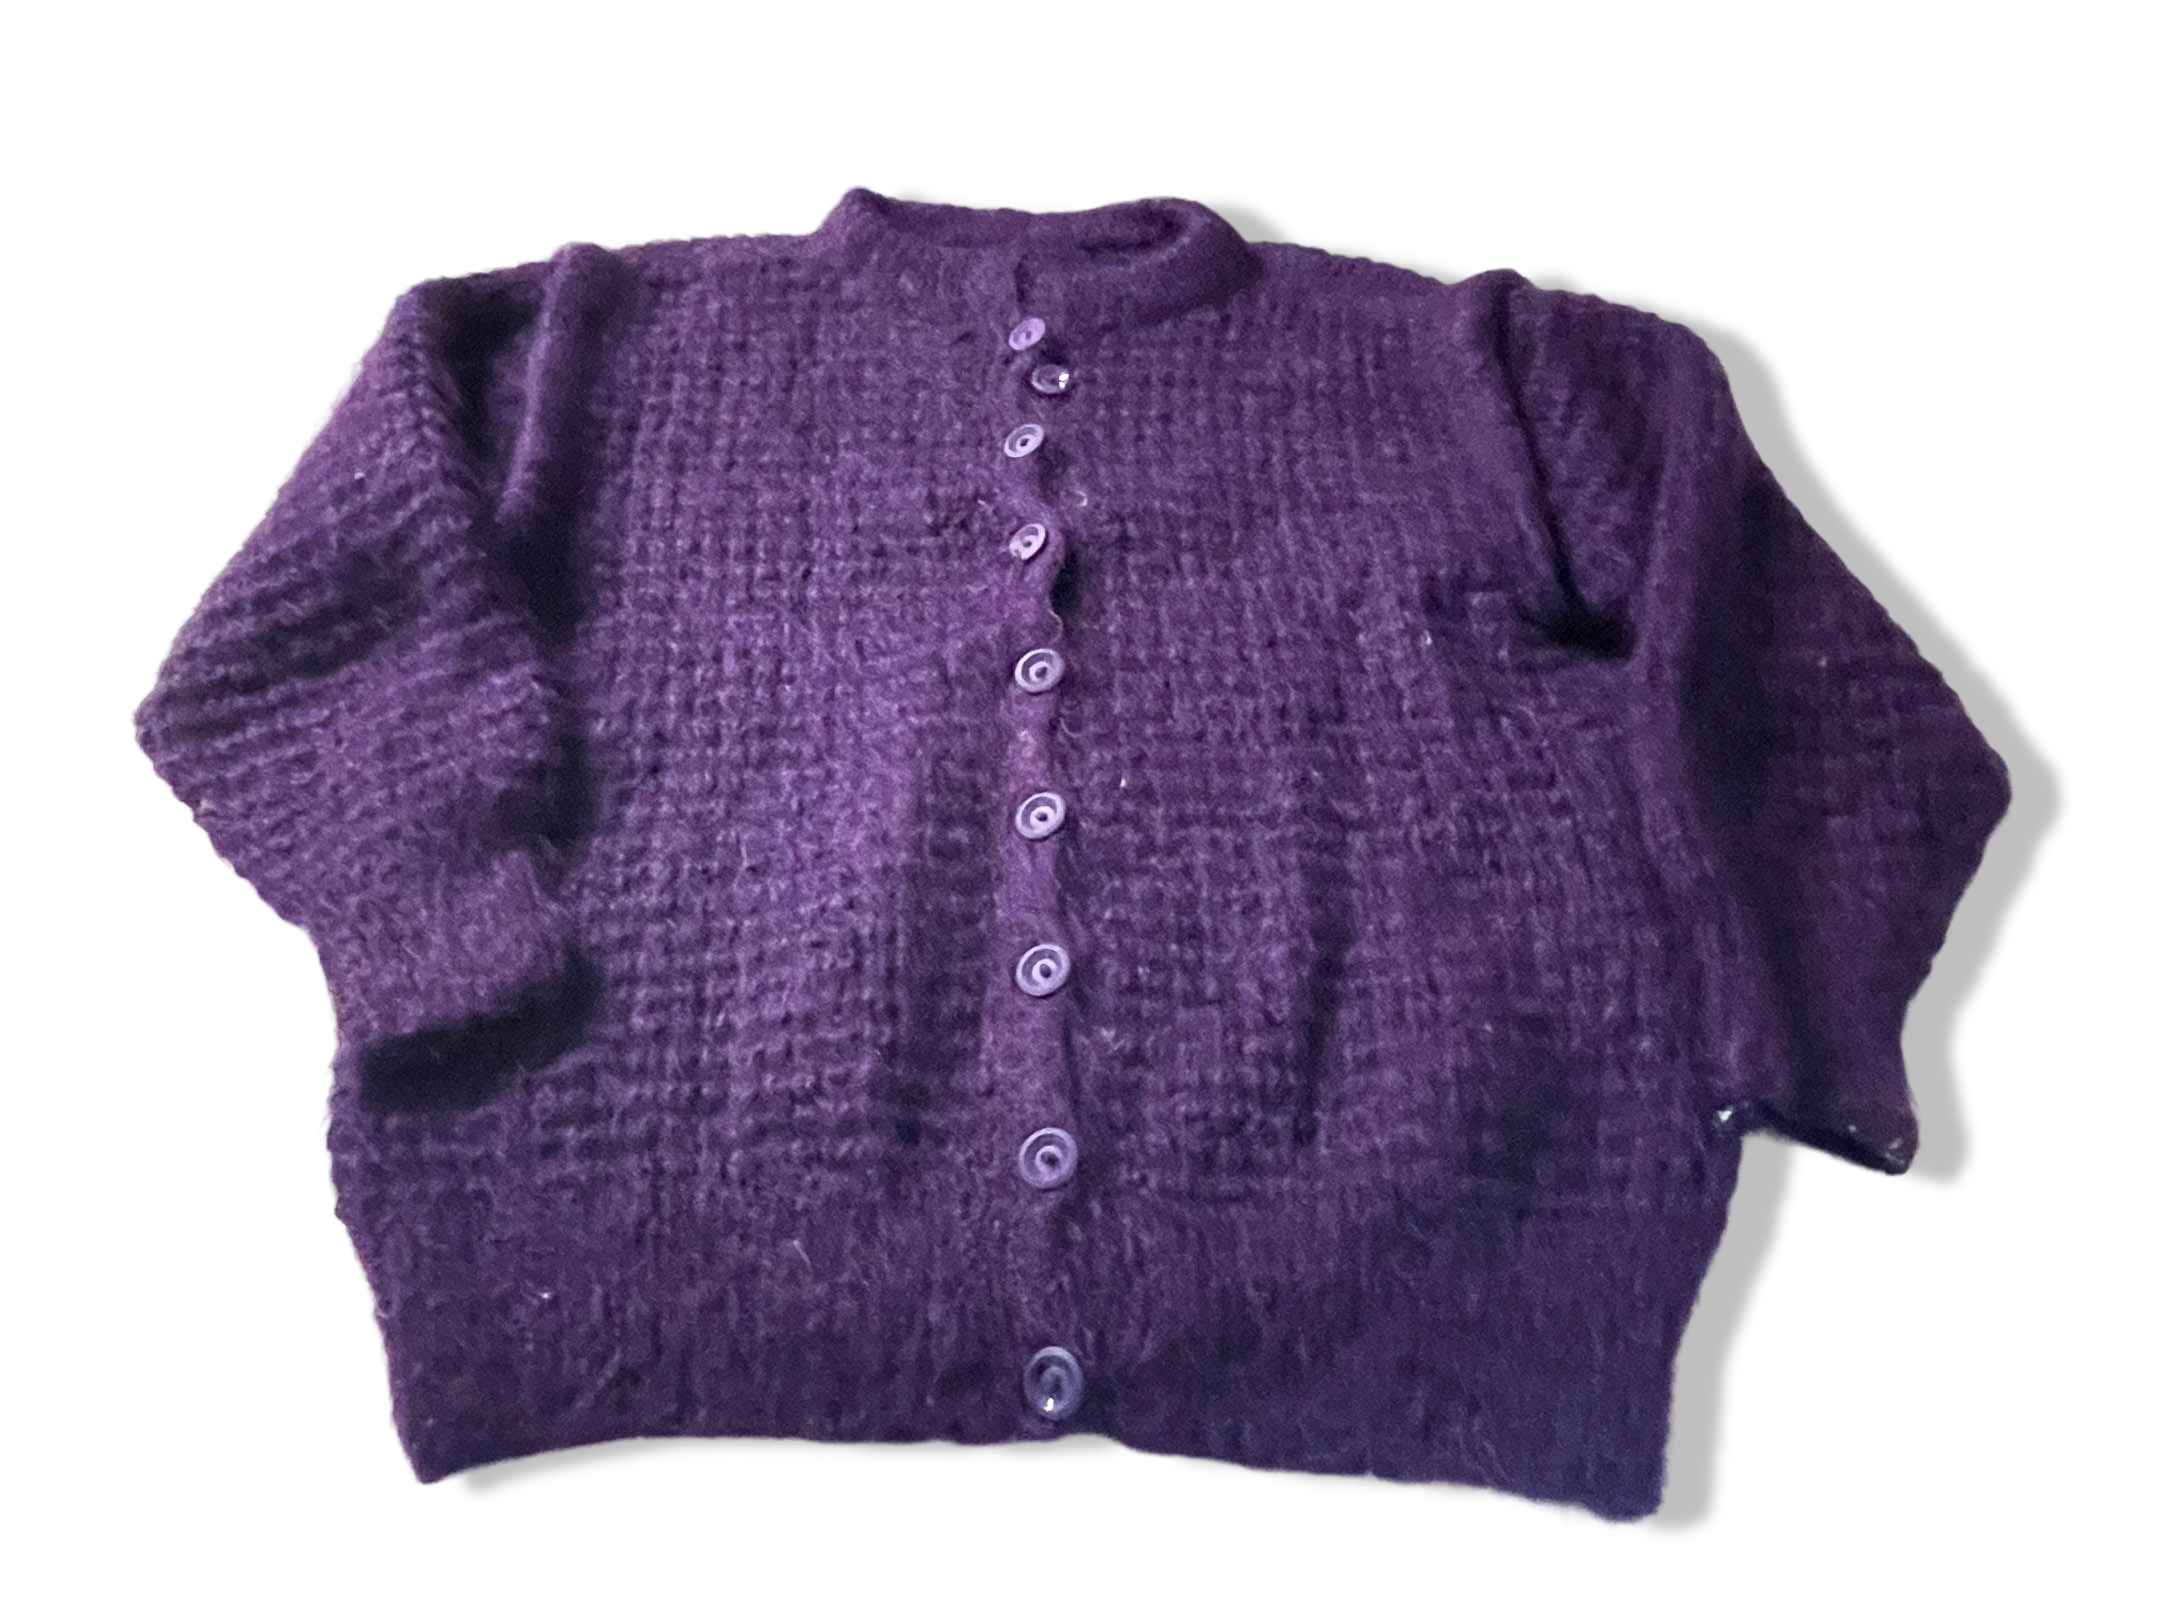 Vintage women's button up cable knitted purple cardigan in L/XL|L28 W23|SKU 4024